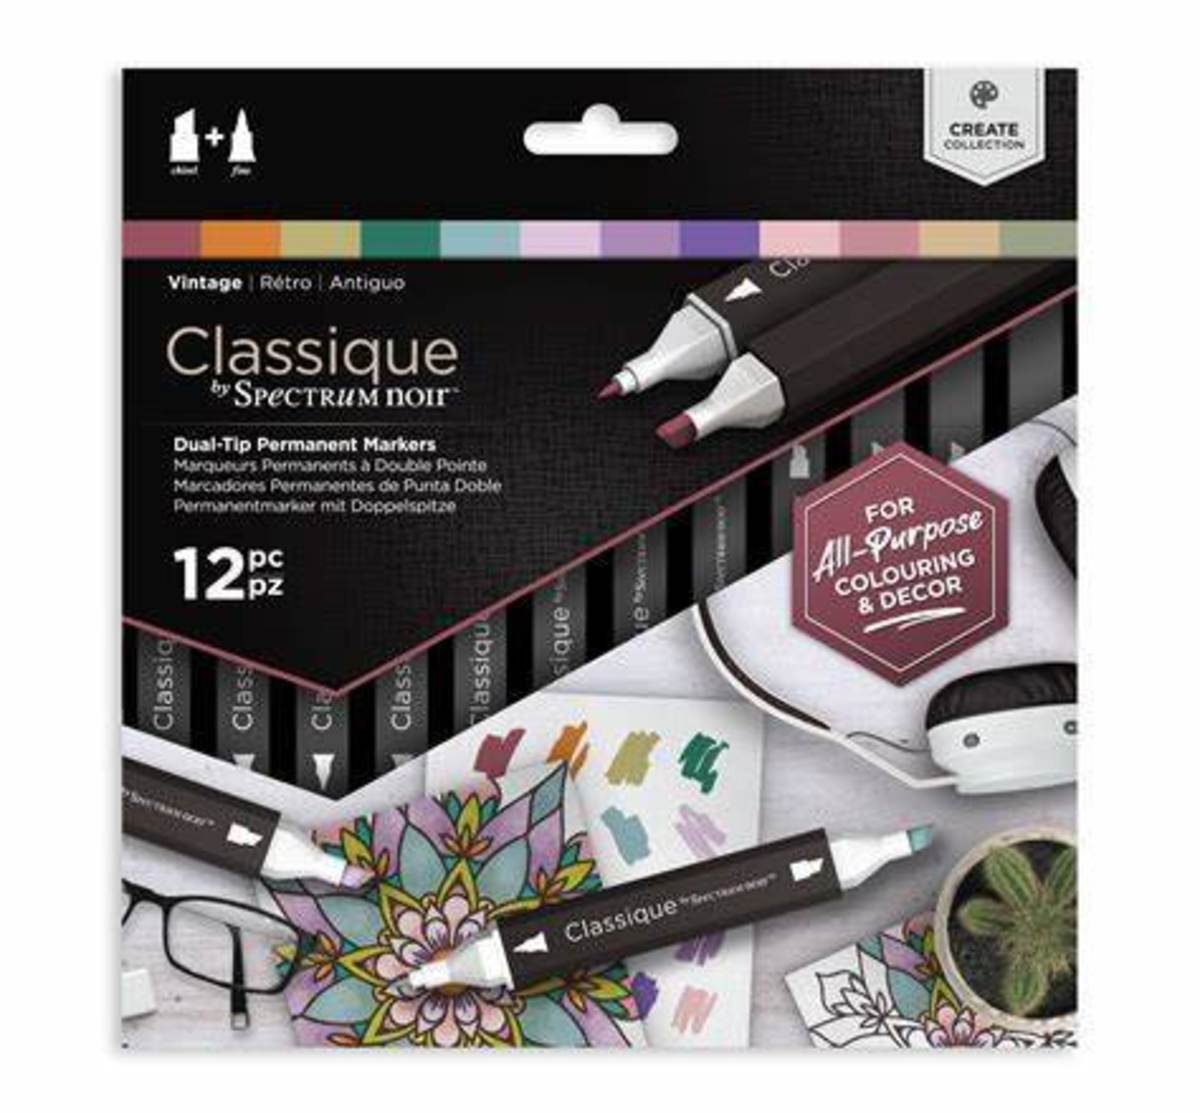 The Spectrum Noir Classique was among the first in the line and still preferred by paper crafters